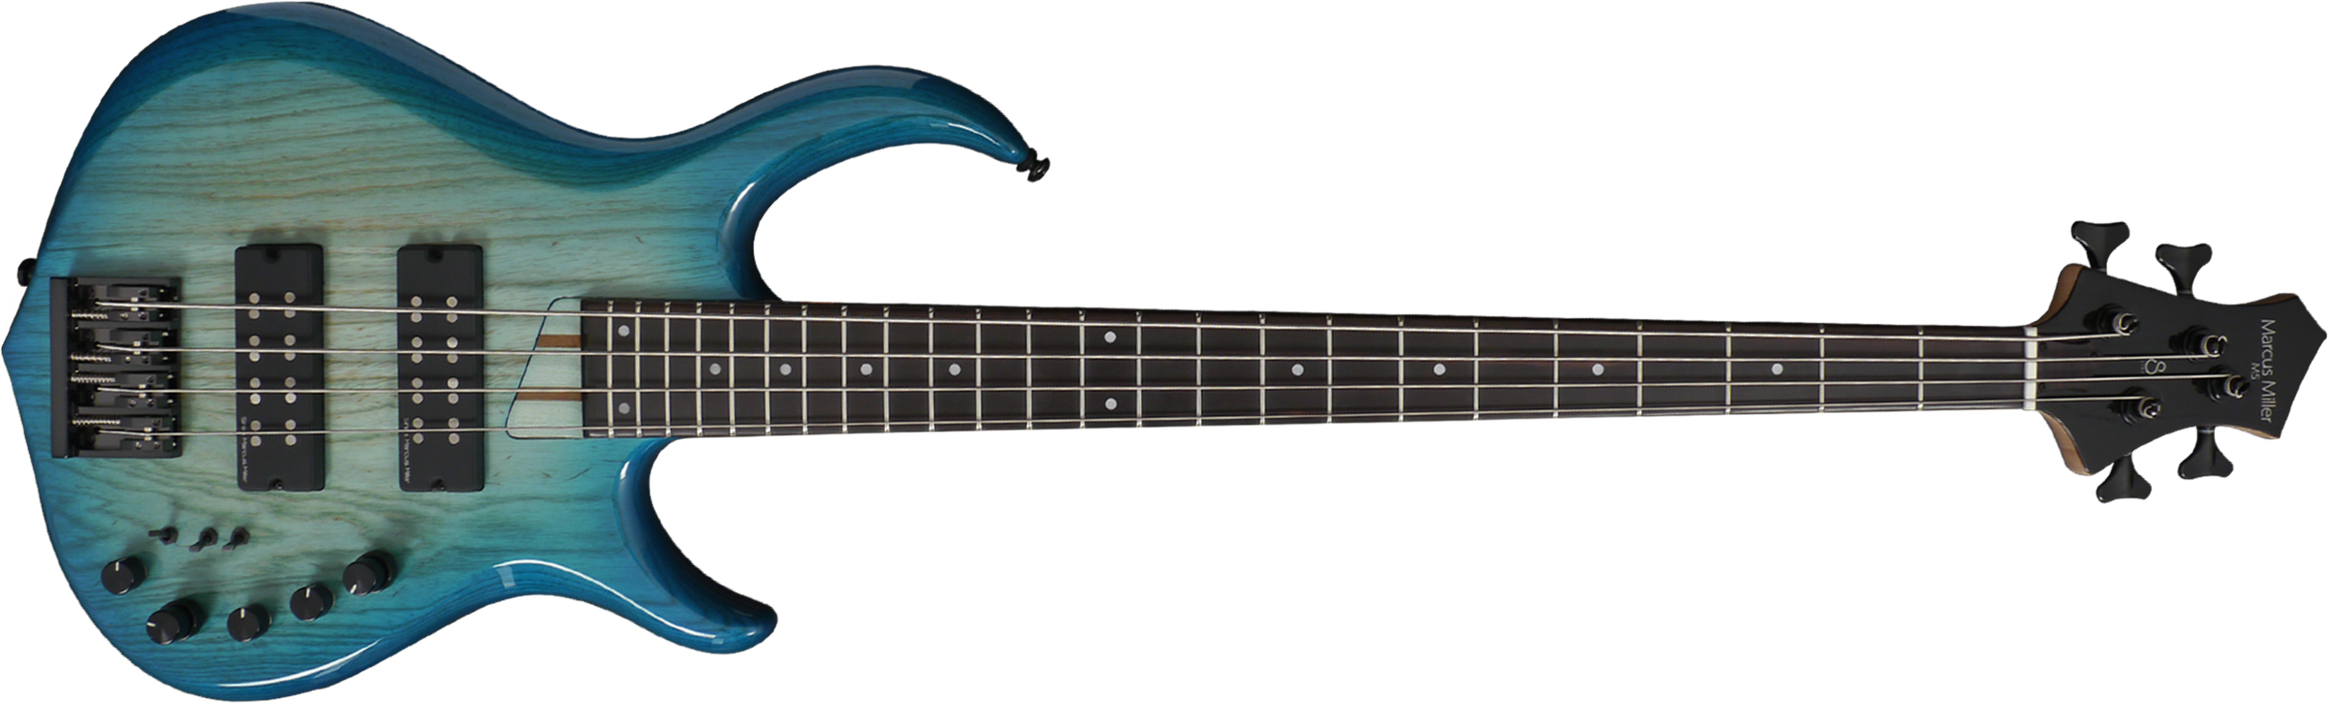 Marcus Miller M5 Swamp Ash 4st Active Eb - Transparent Blue - Solidbody E-bass - Main picture